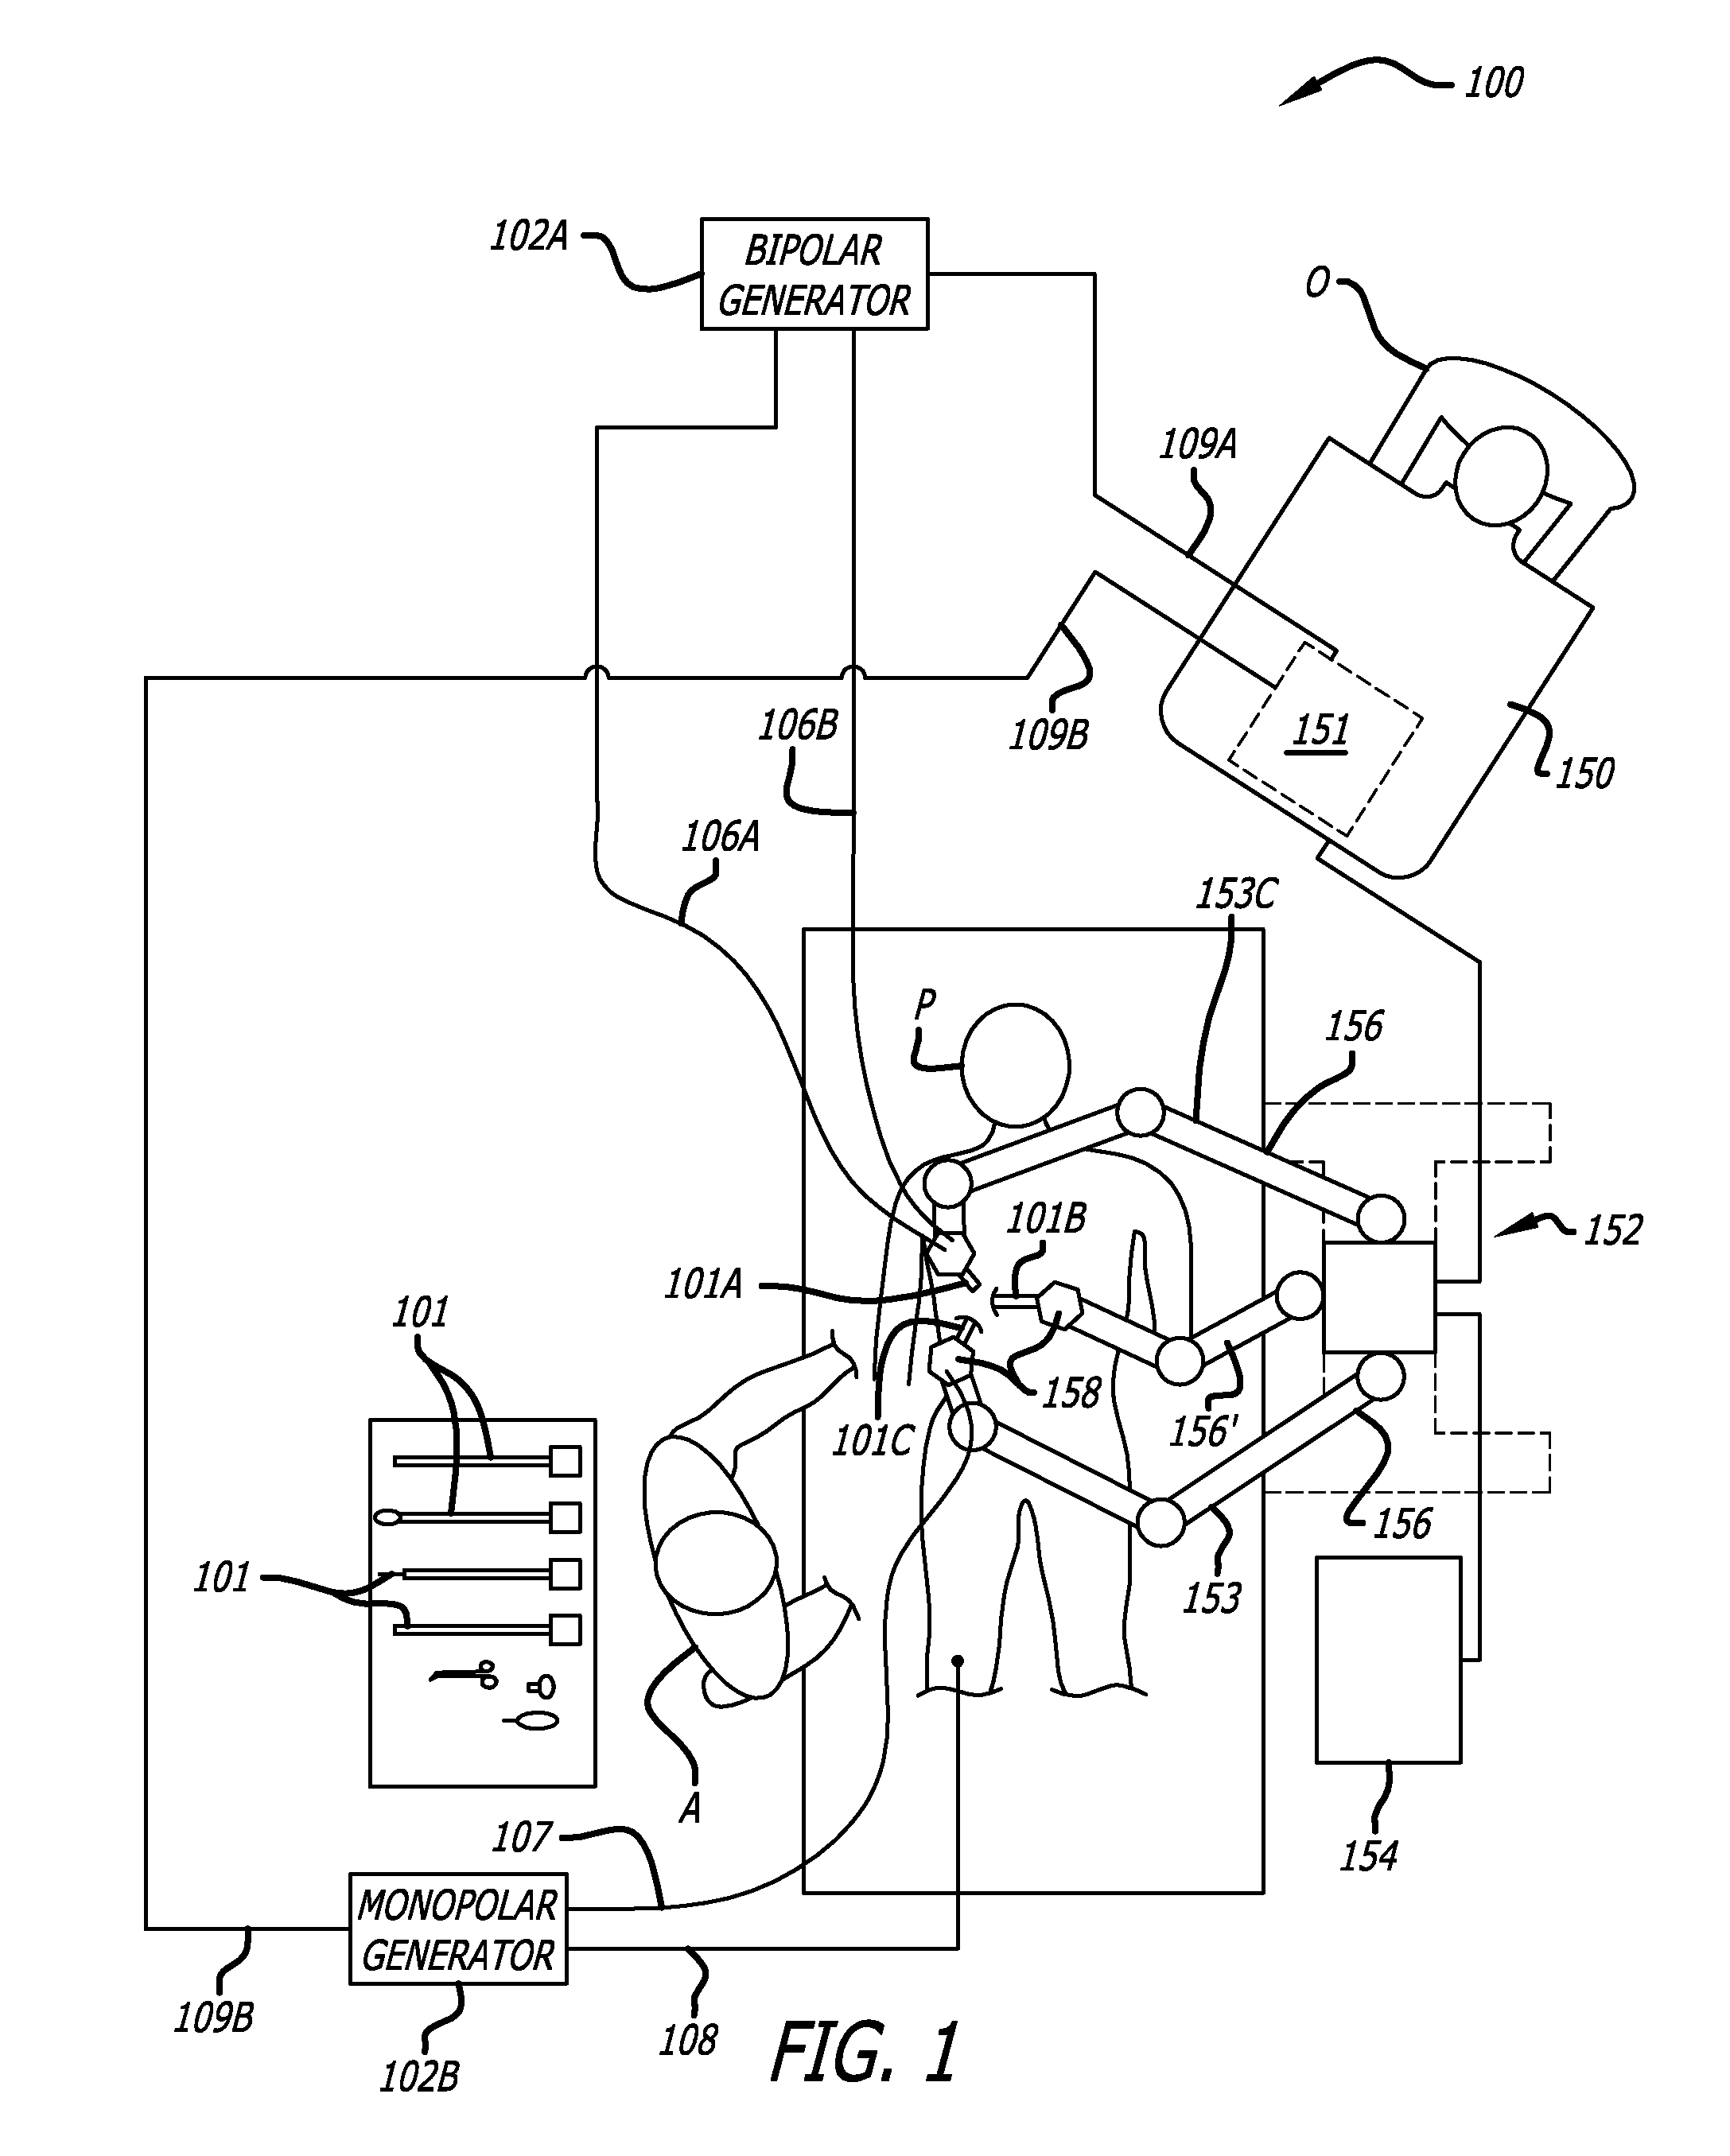 Apparatus and method of user interface with alternate tool mode for robotic surgical tools